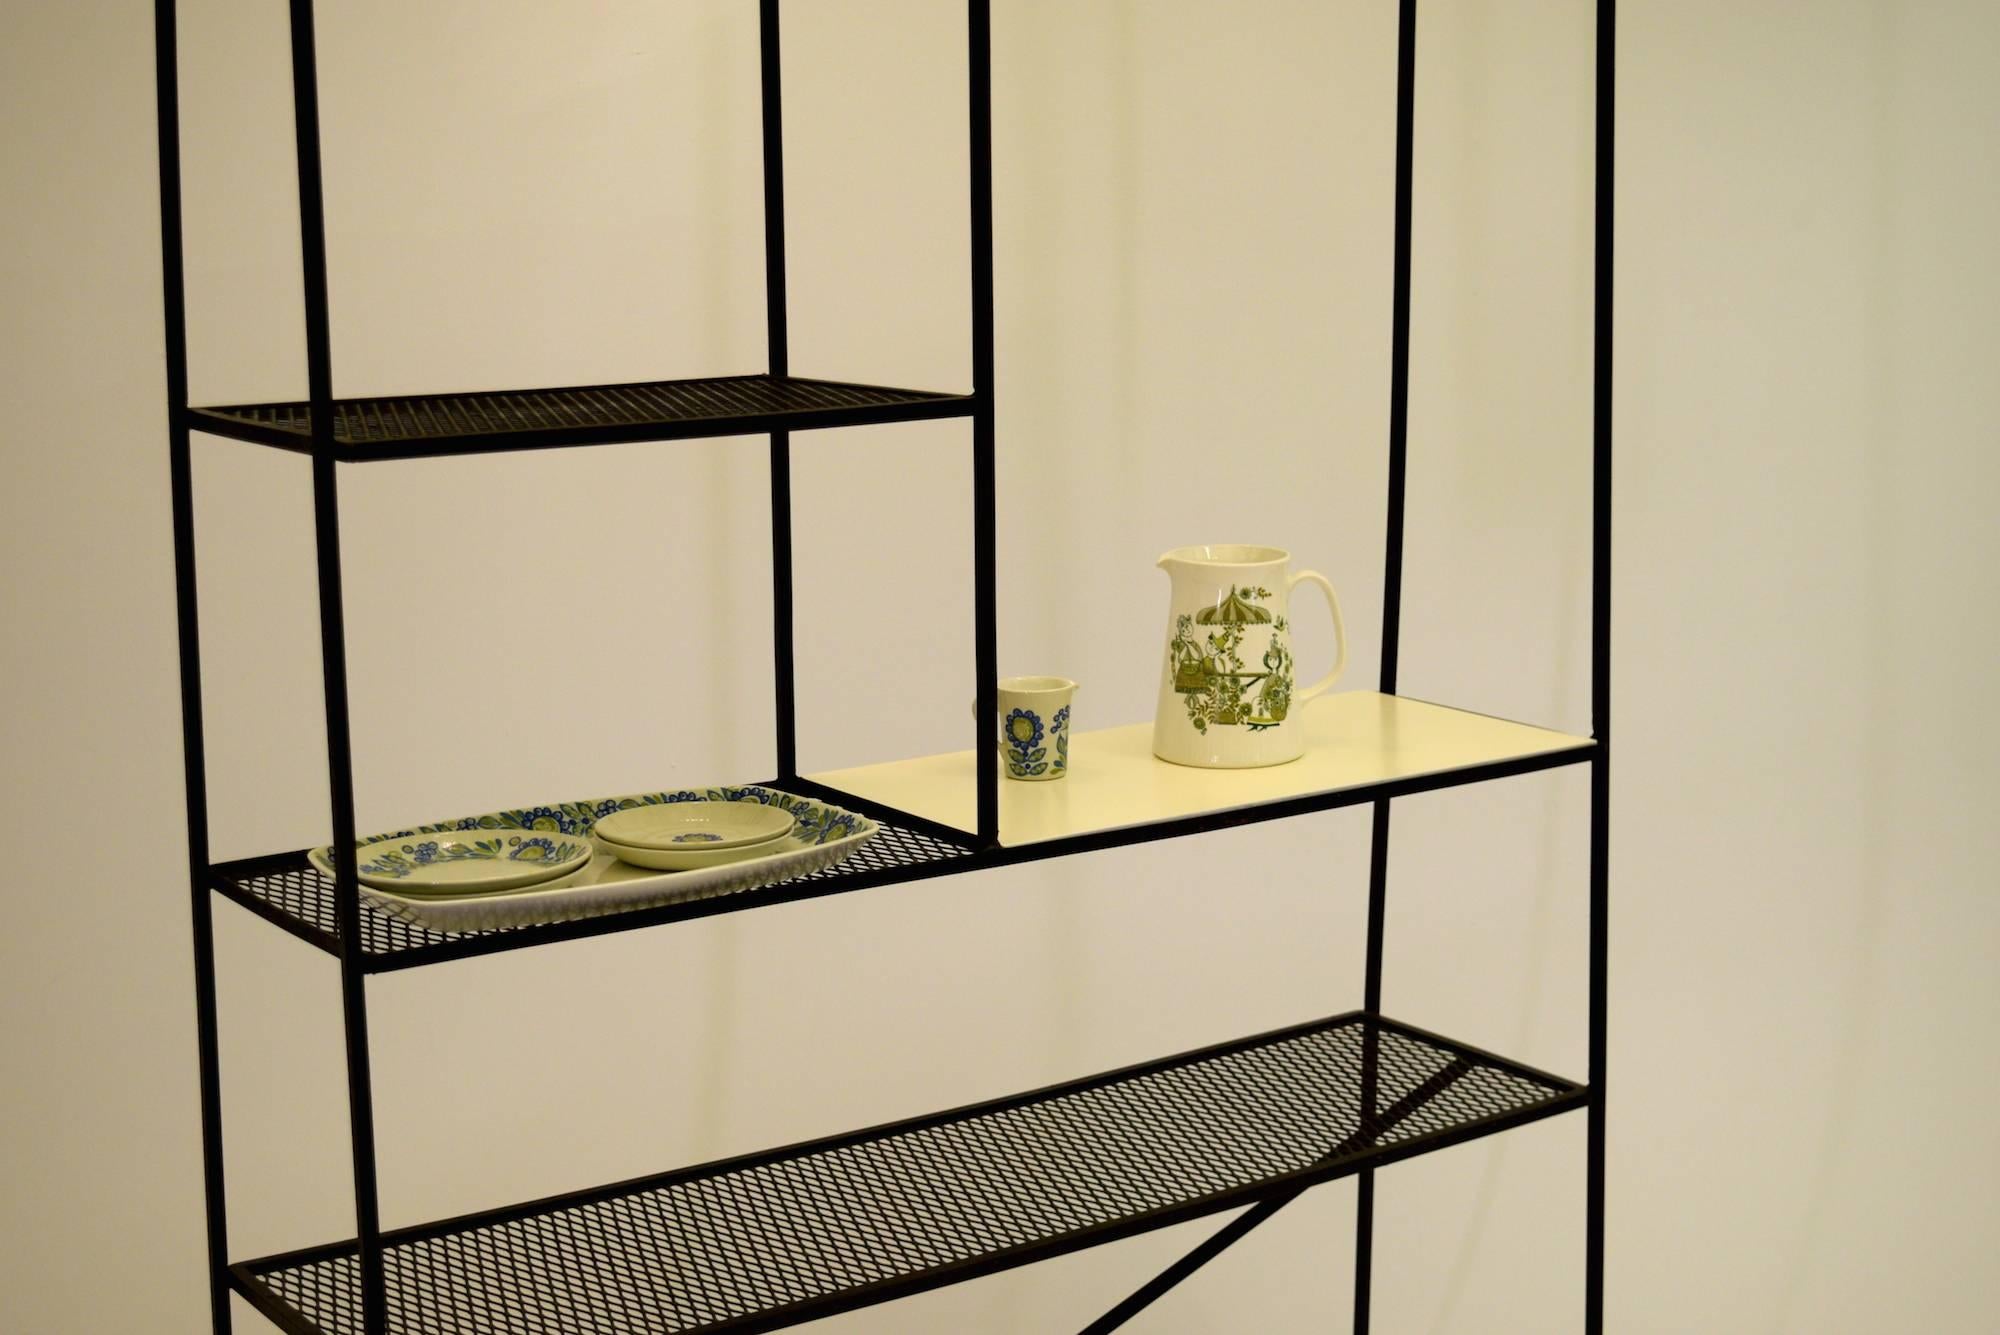 Exceptionally multifunctional shelving unit by Freda Diamond that can be used as a room divider, etagere or bookcase for dining, living or even patio use with outdoor furniture. This versatile display unit is constructed of steel mesh on wrought